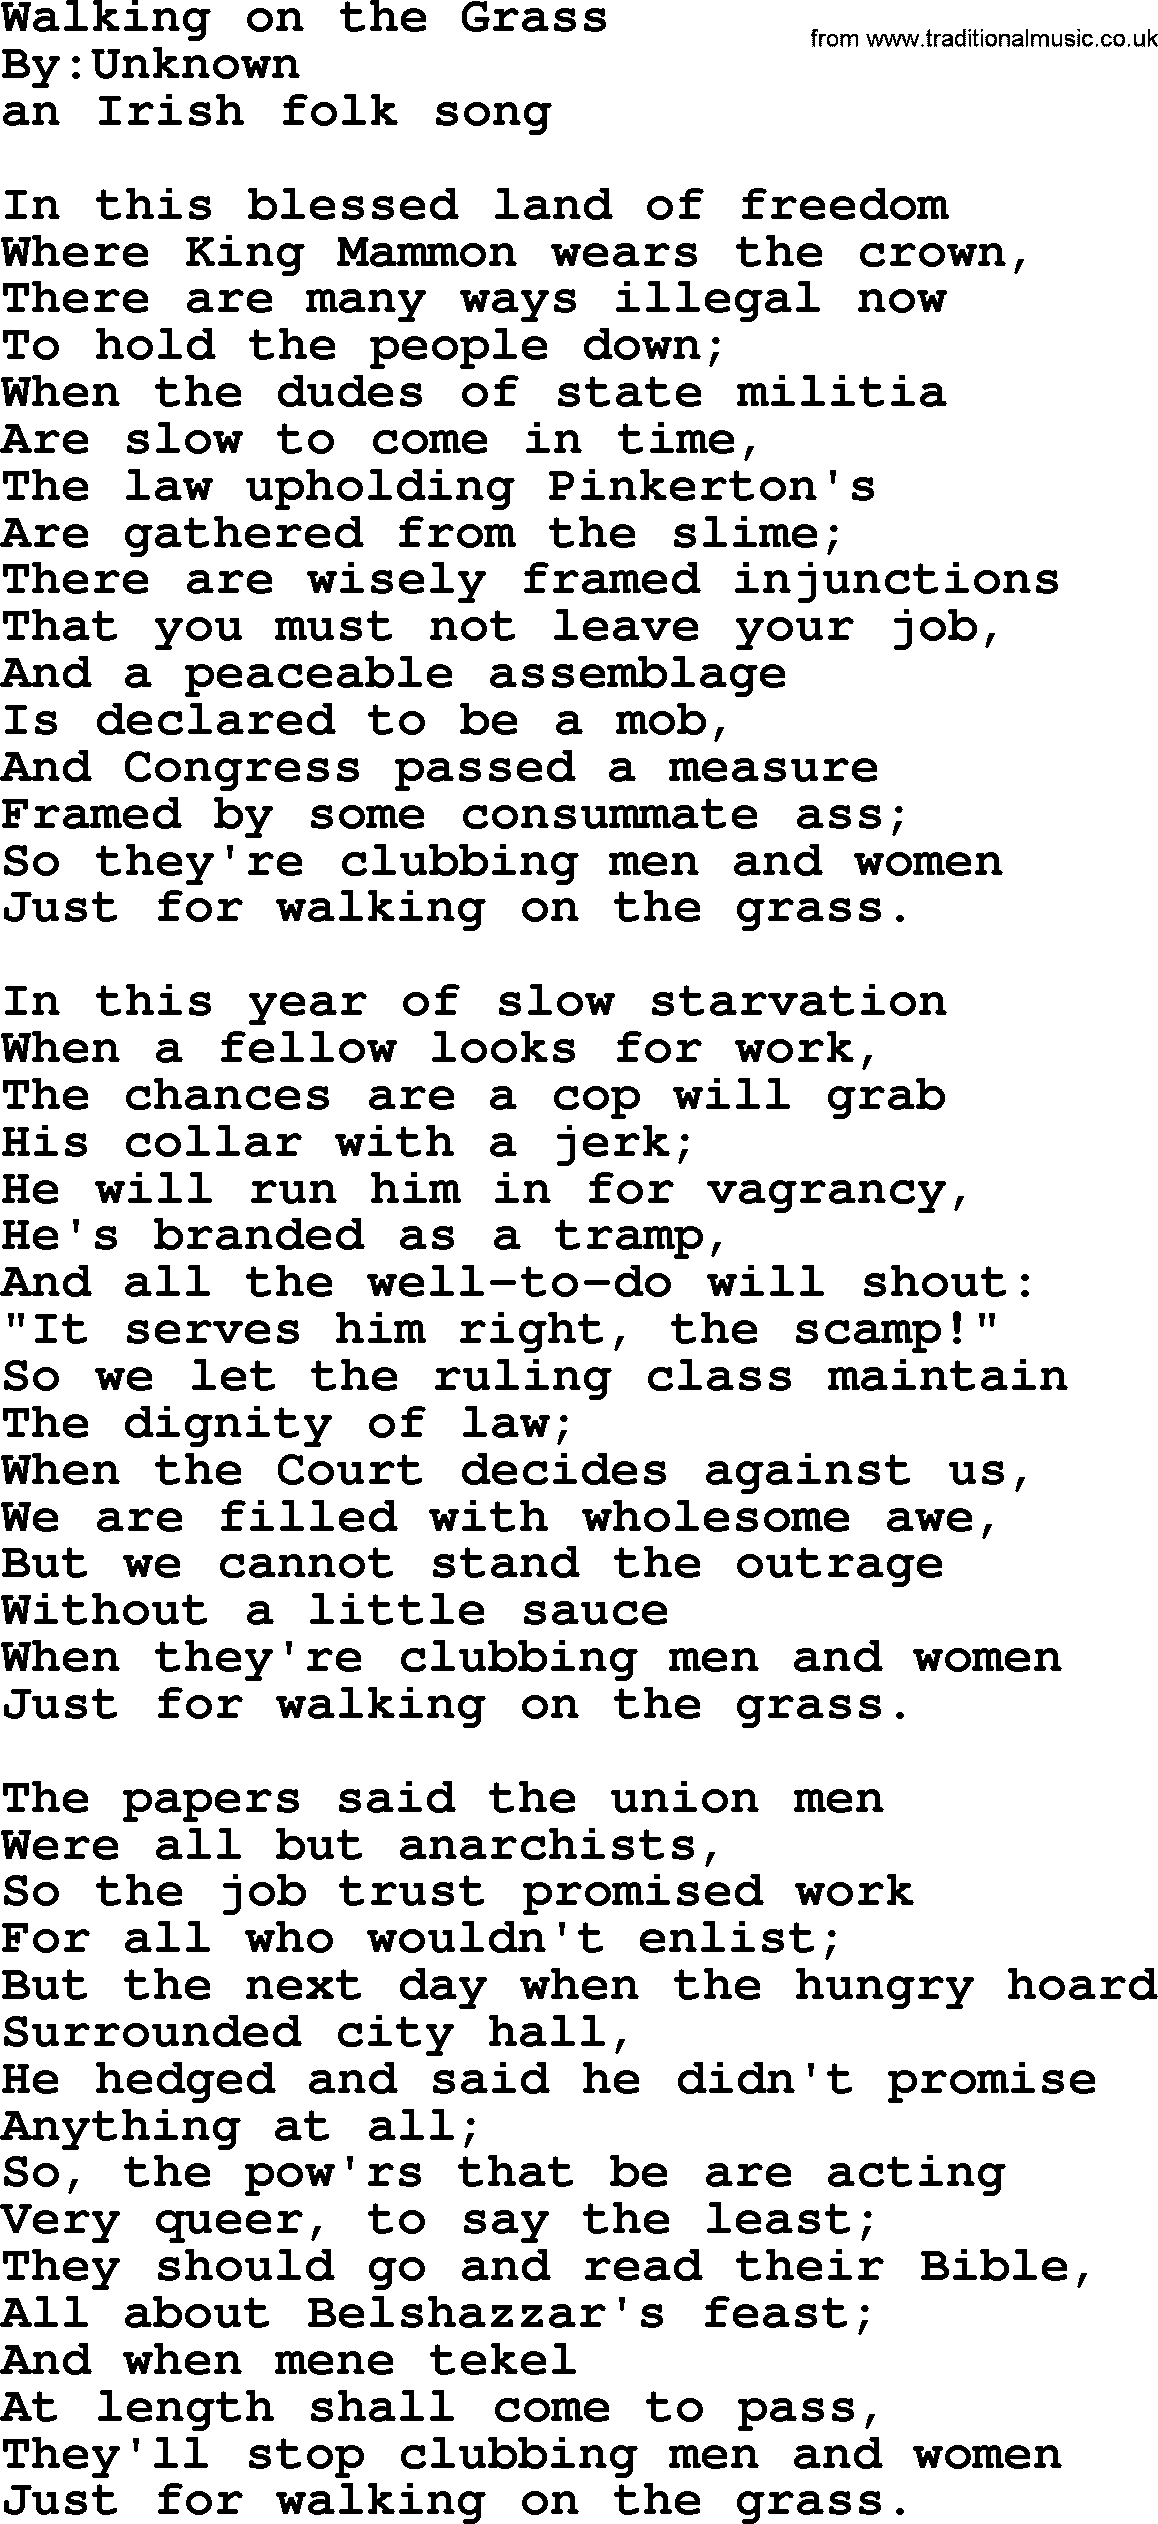 Political, Solidarity, Workers or Union song: Walking On The Grass, lyrics